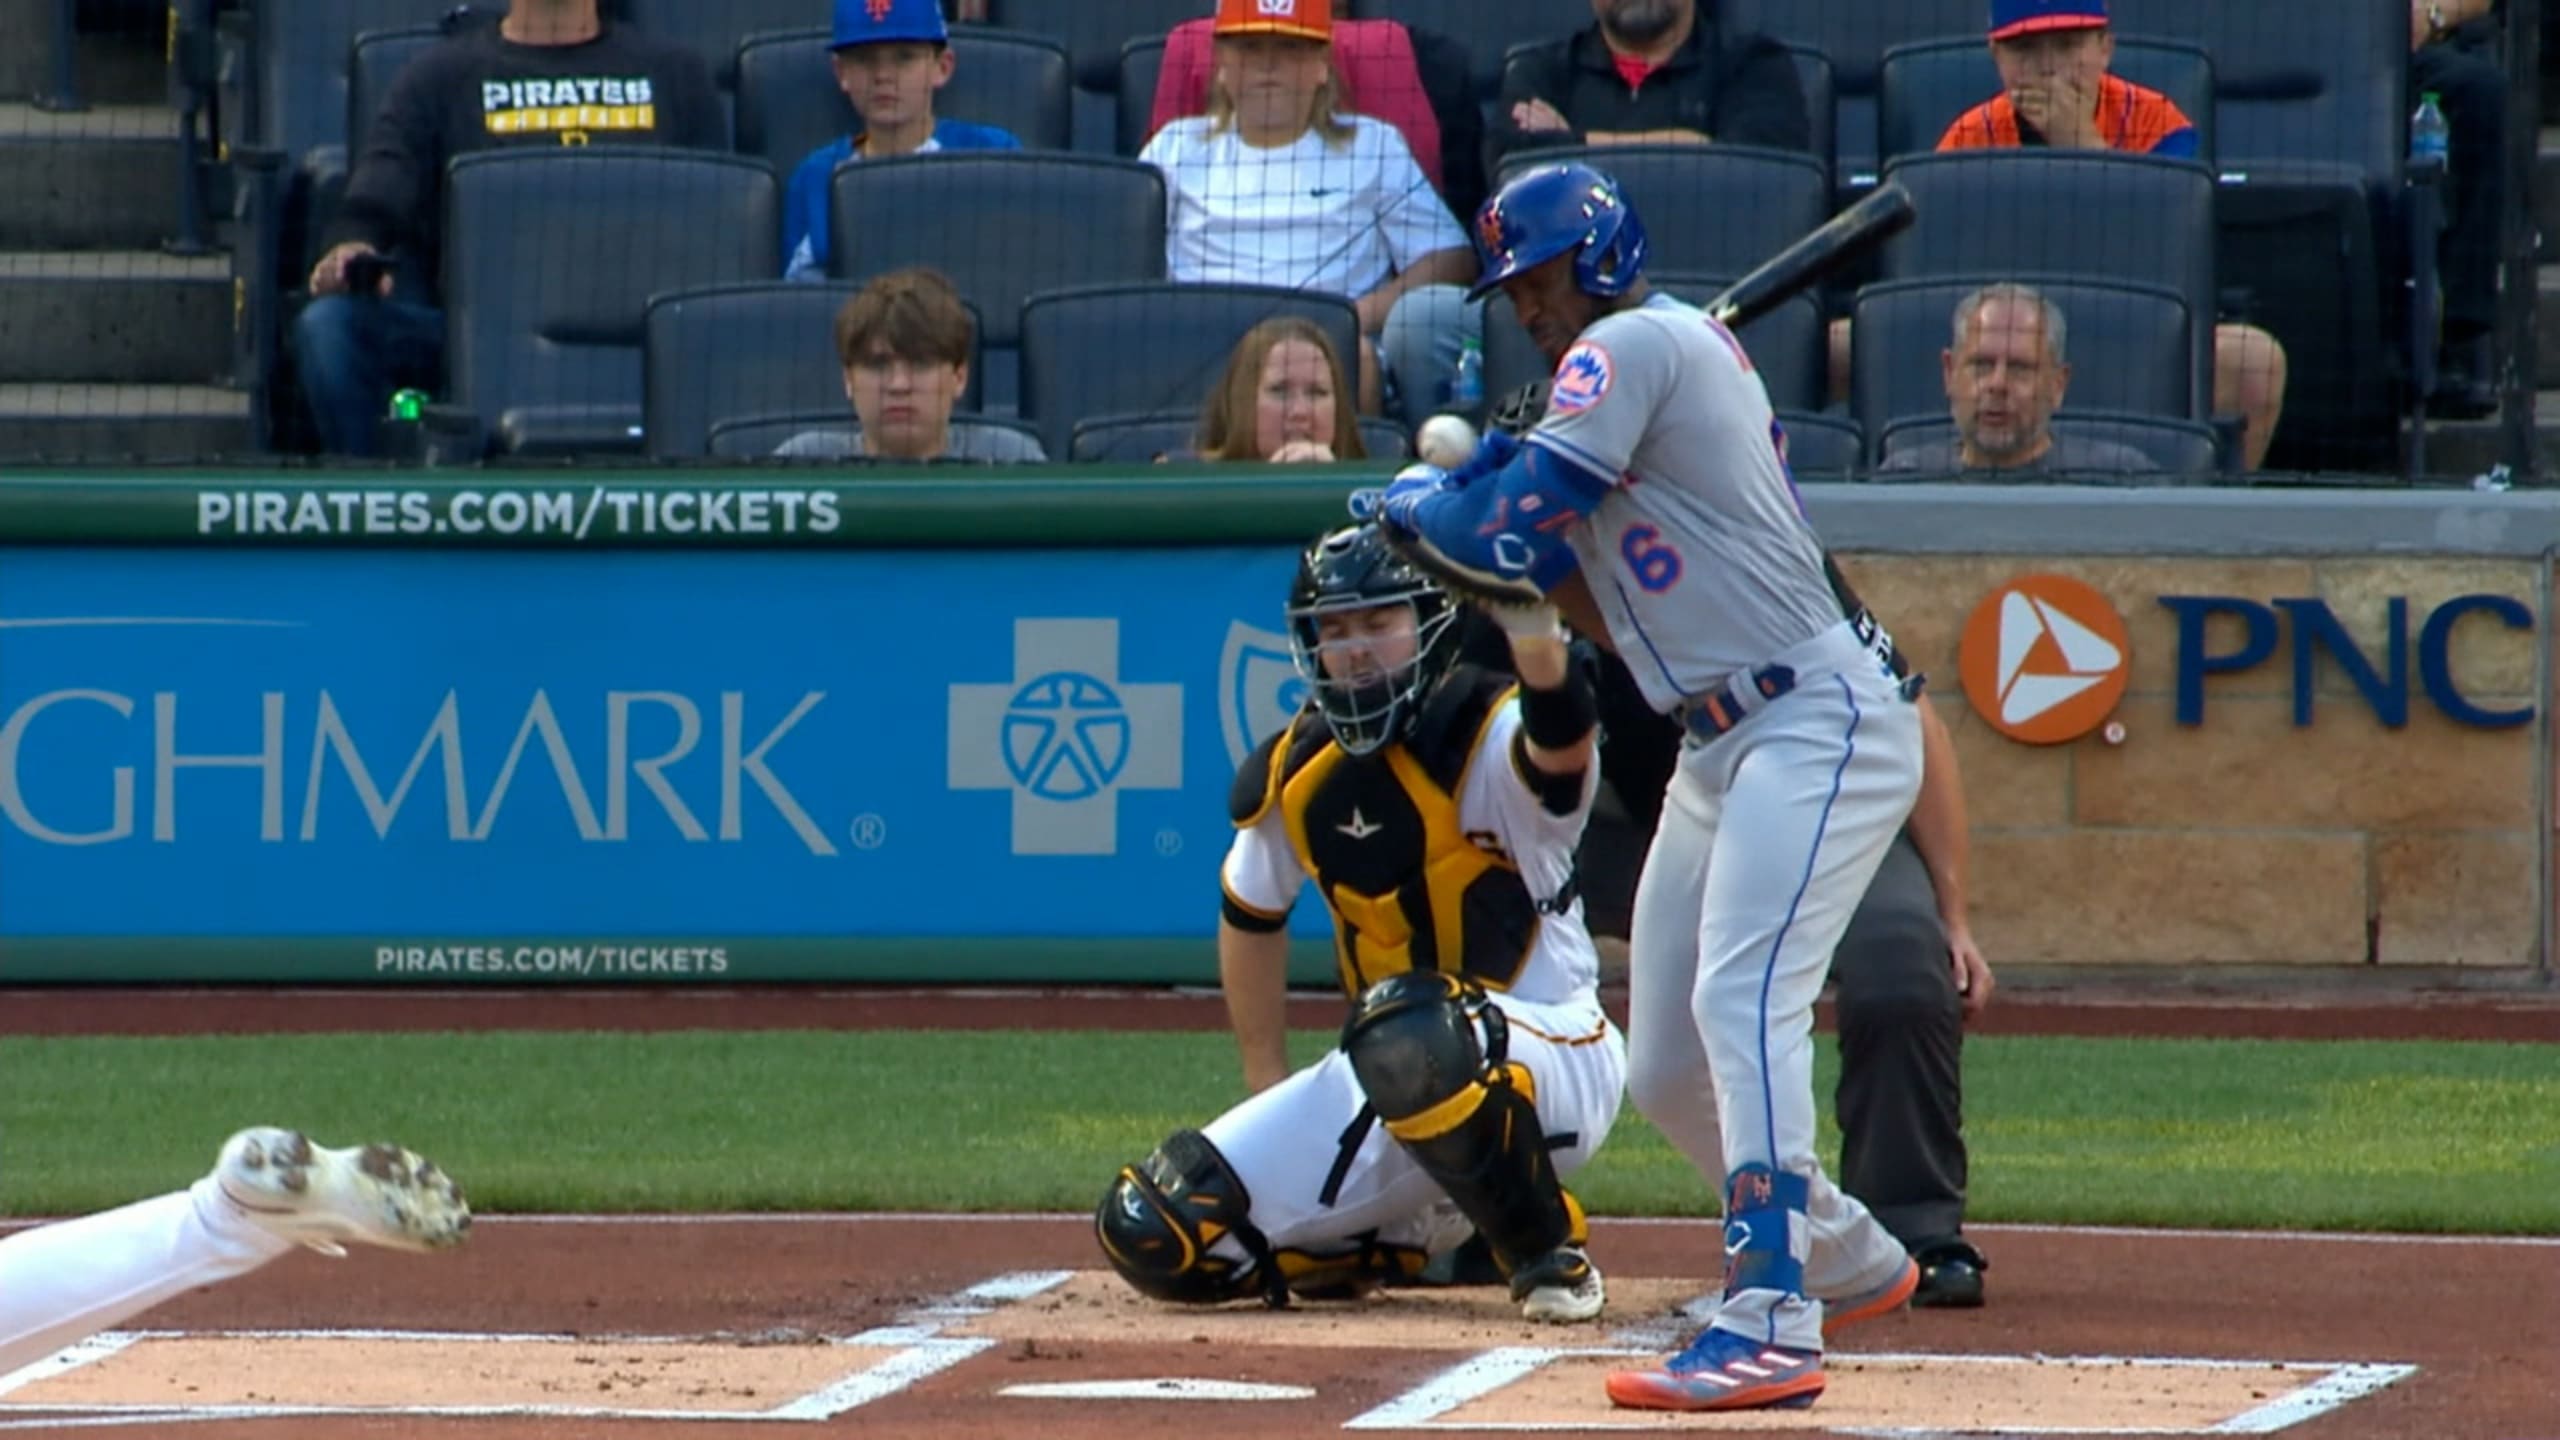 Starling Marte injury update: Mets outfielder placed on IL with